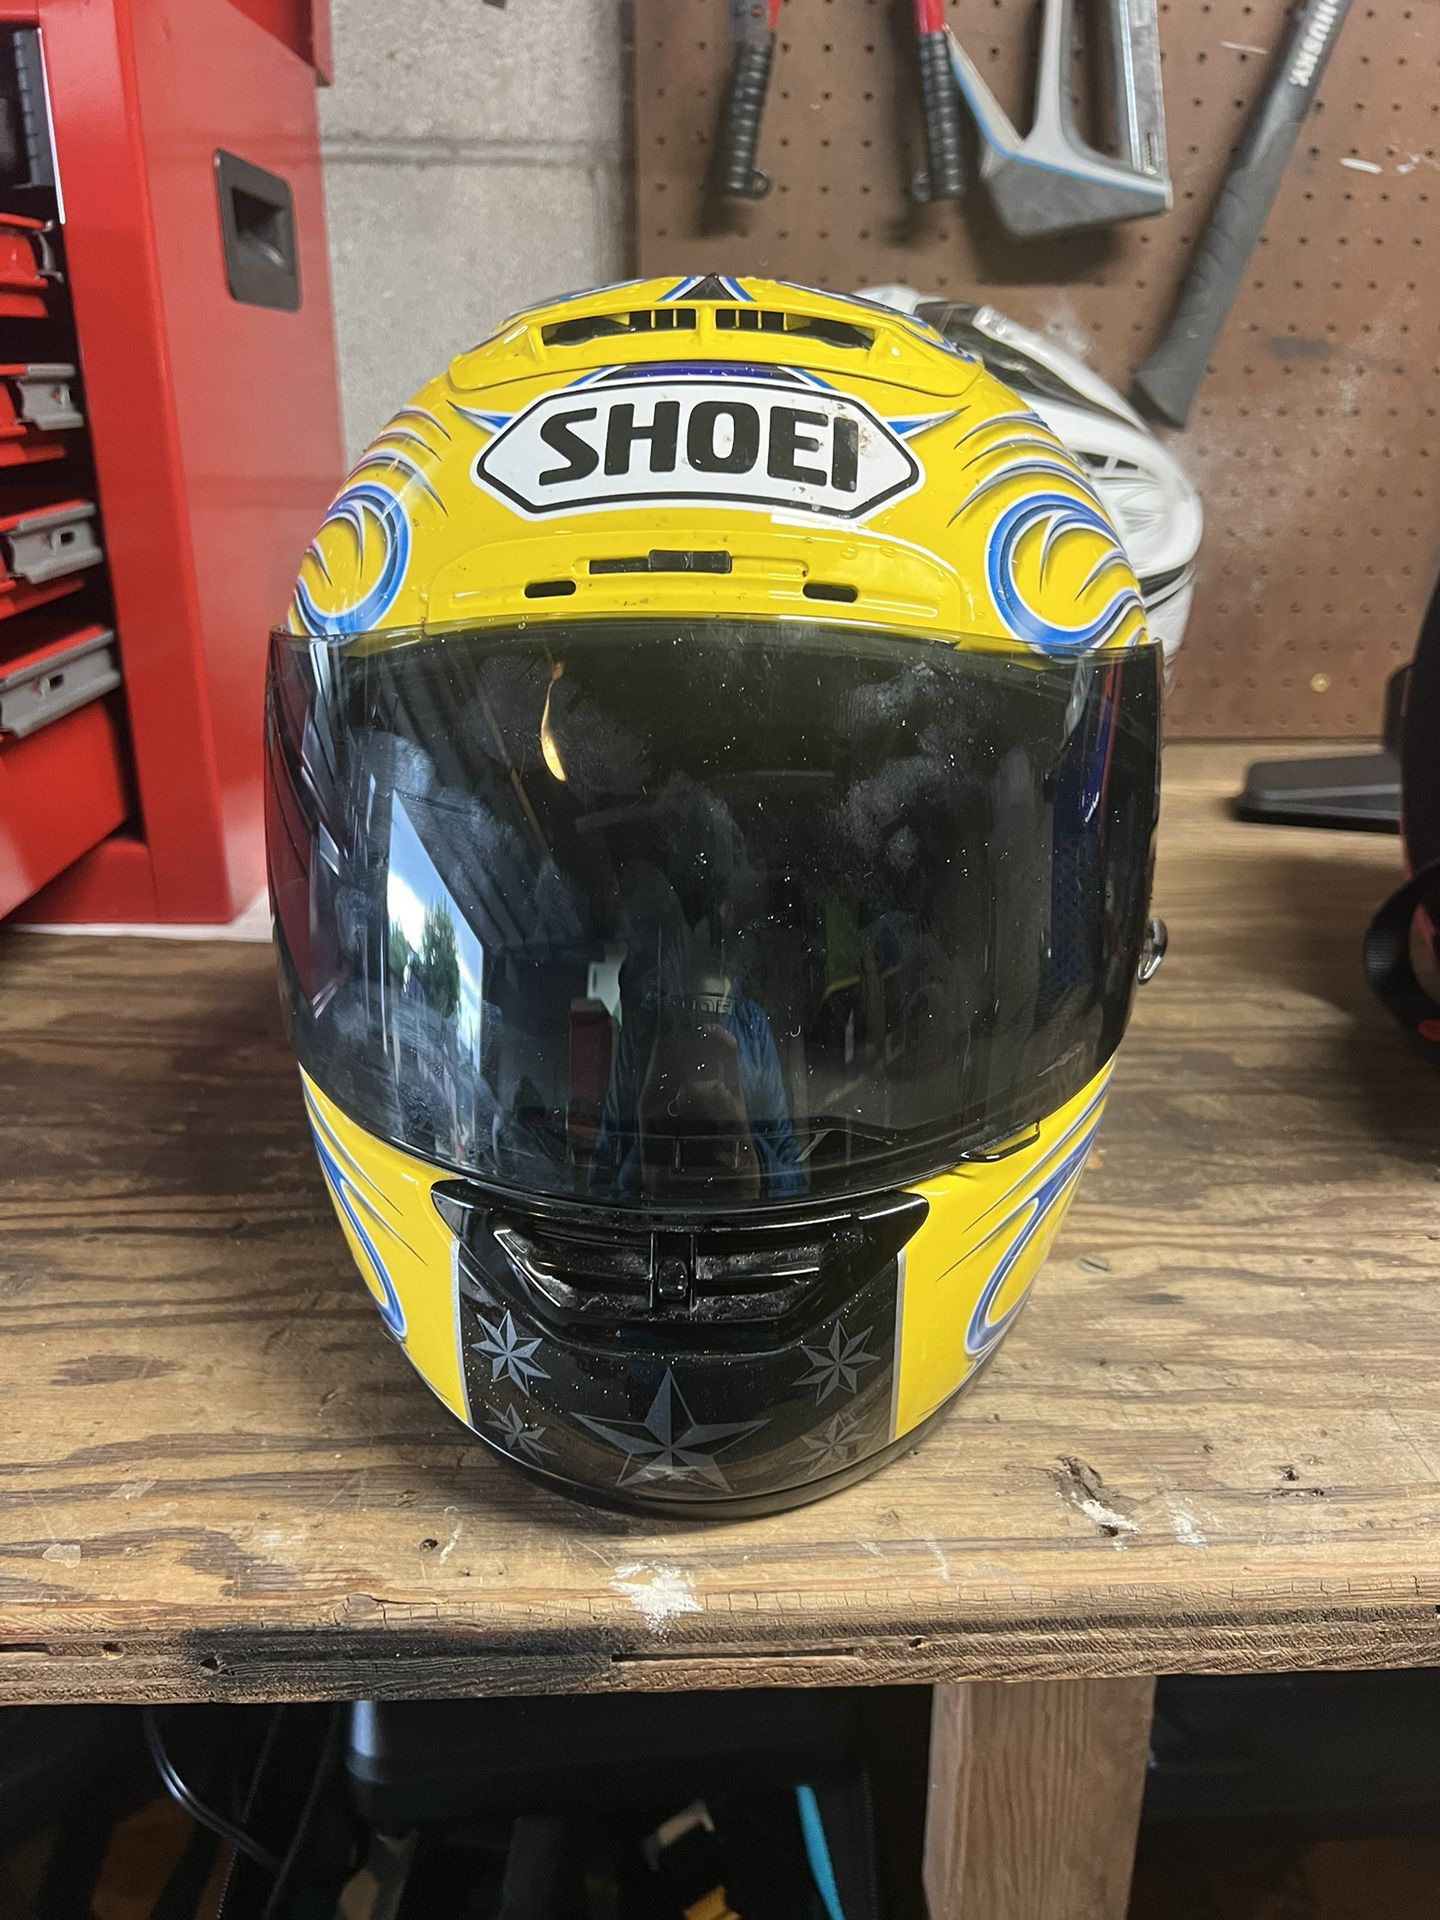 Shoei X Eleven for Sale in Gig Harbor, WA - OfferUp